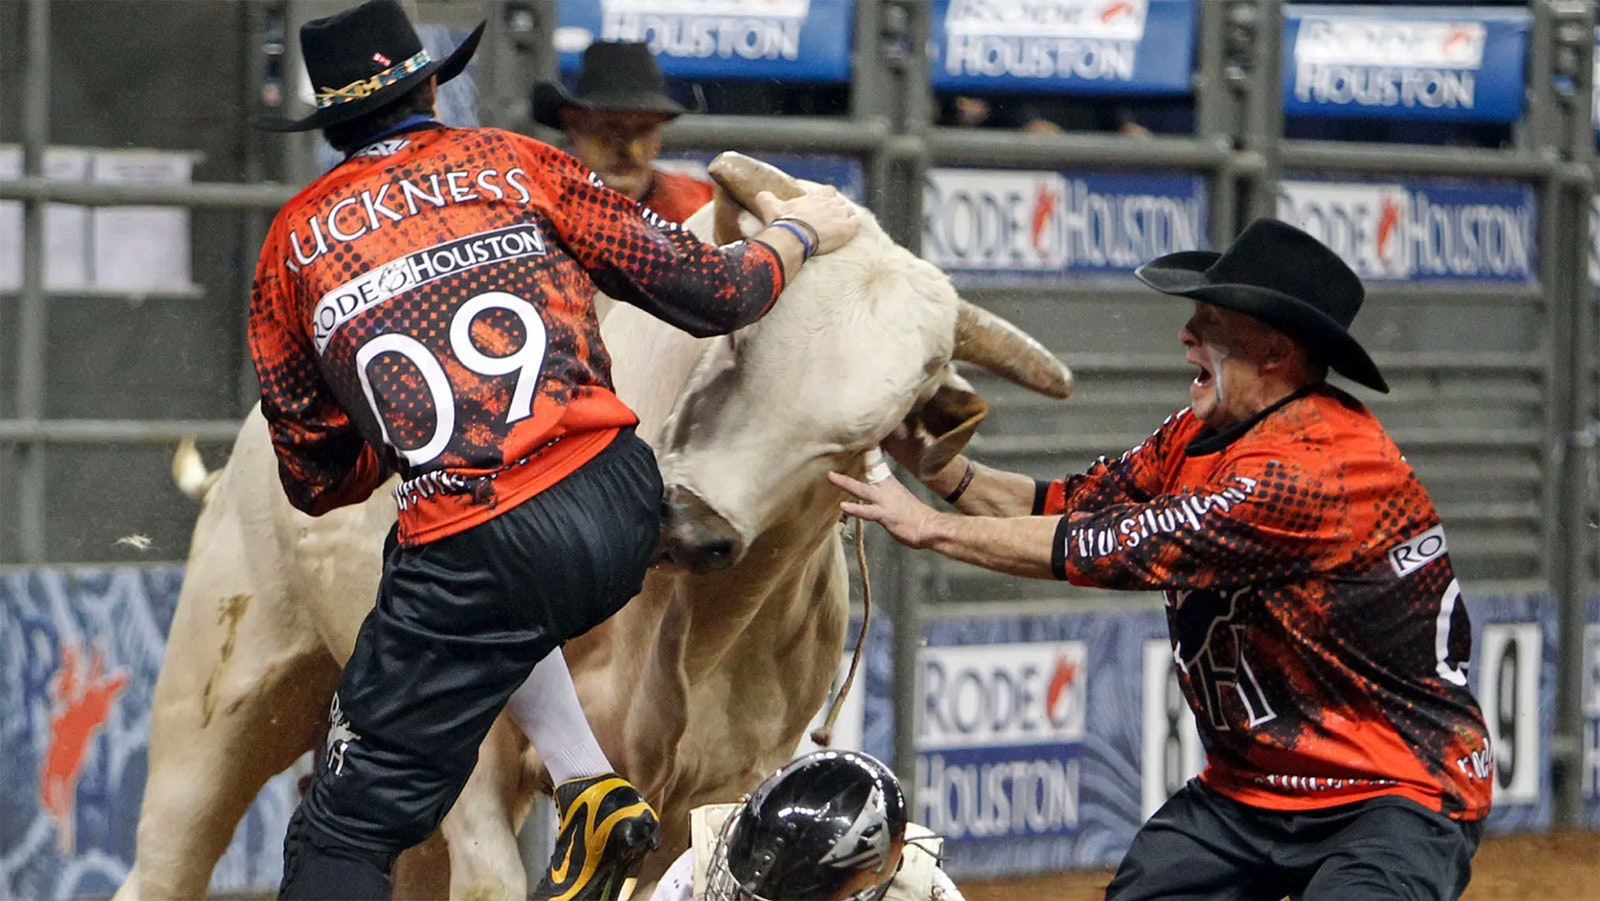 Rodeo bullfighters Dusty Tuckness, left, and Cory Wall keep a bull away from Sonny Murphy after he finished his ride during the bull riding event at the Houston Livestock Show and Rodeo in Reliant Stadium on March 11, 2012, in Houston.